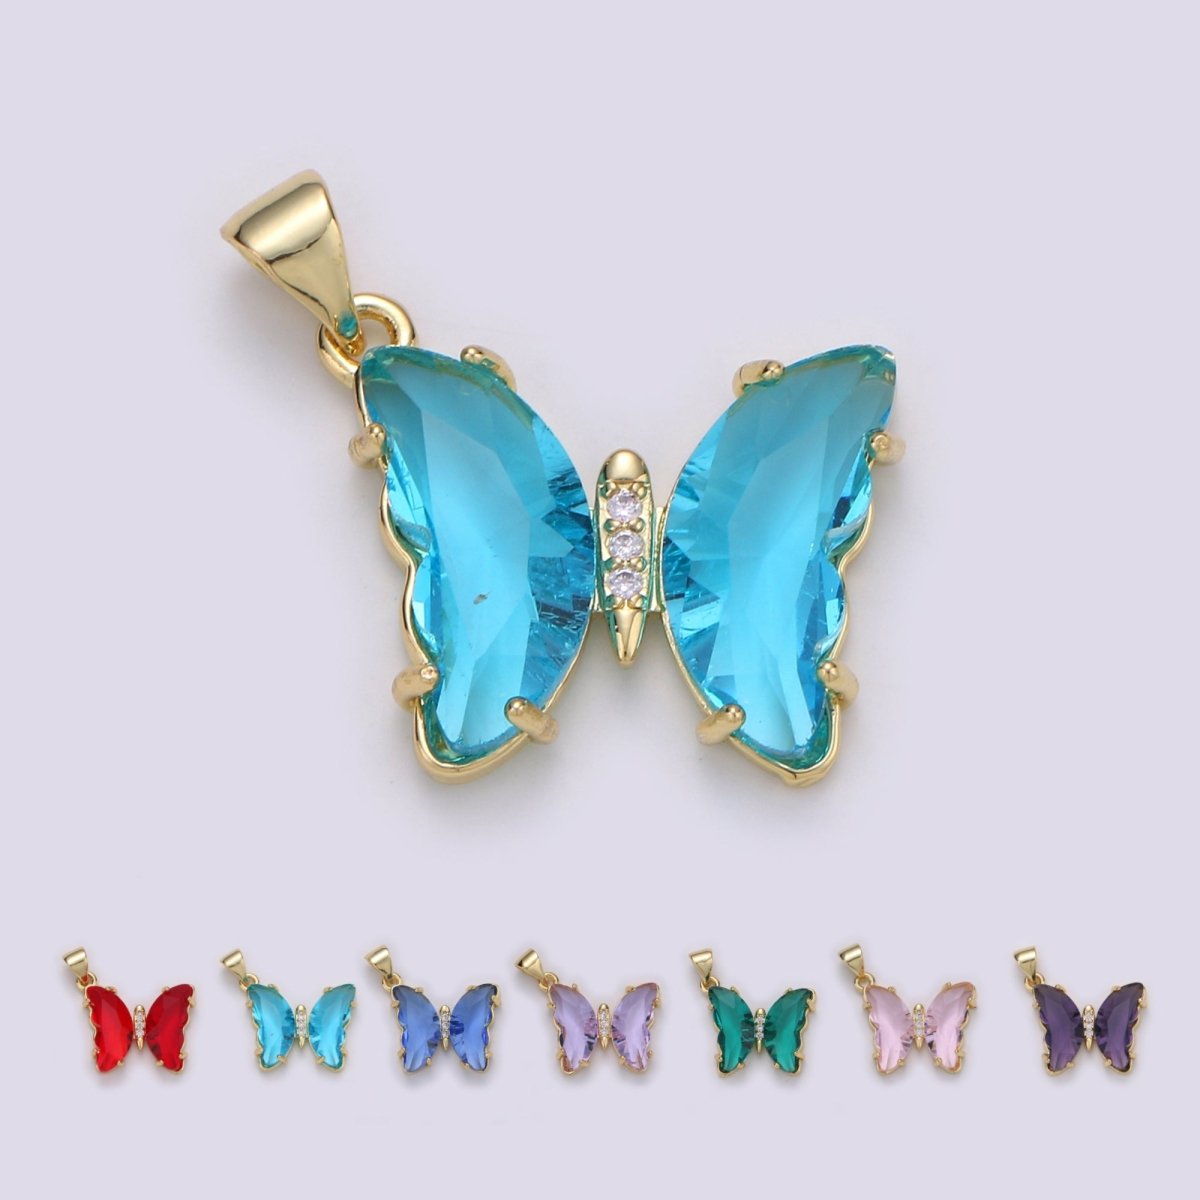 Pink Mariposa Butterfly Charm Acrylic Butterfly Charm Glass Pendant for Necklace Earring Bracelet Component in 24k Gold Filled Tarnish Free J-140~J-146 - DLUXCA